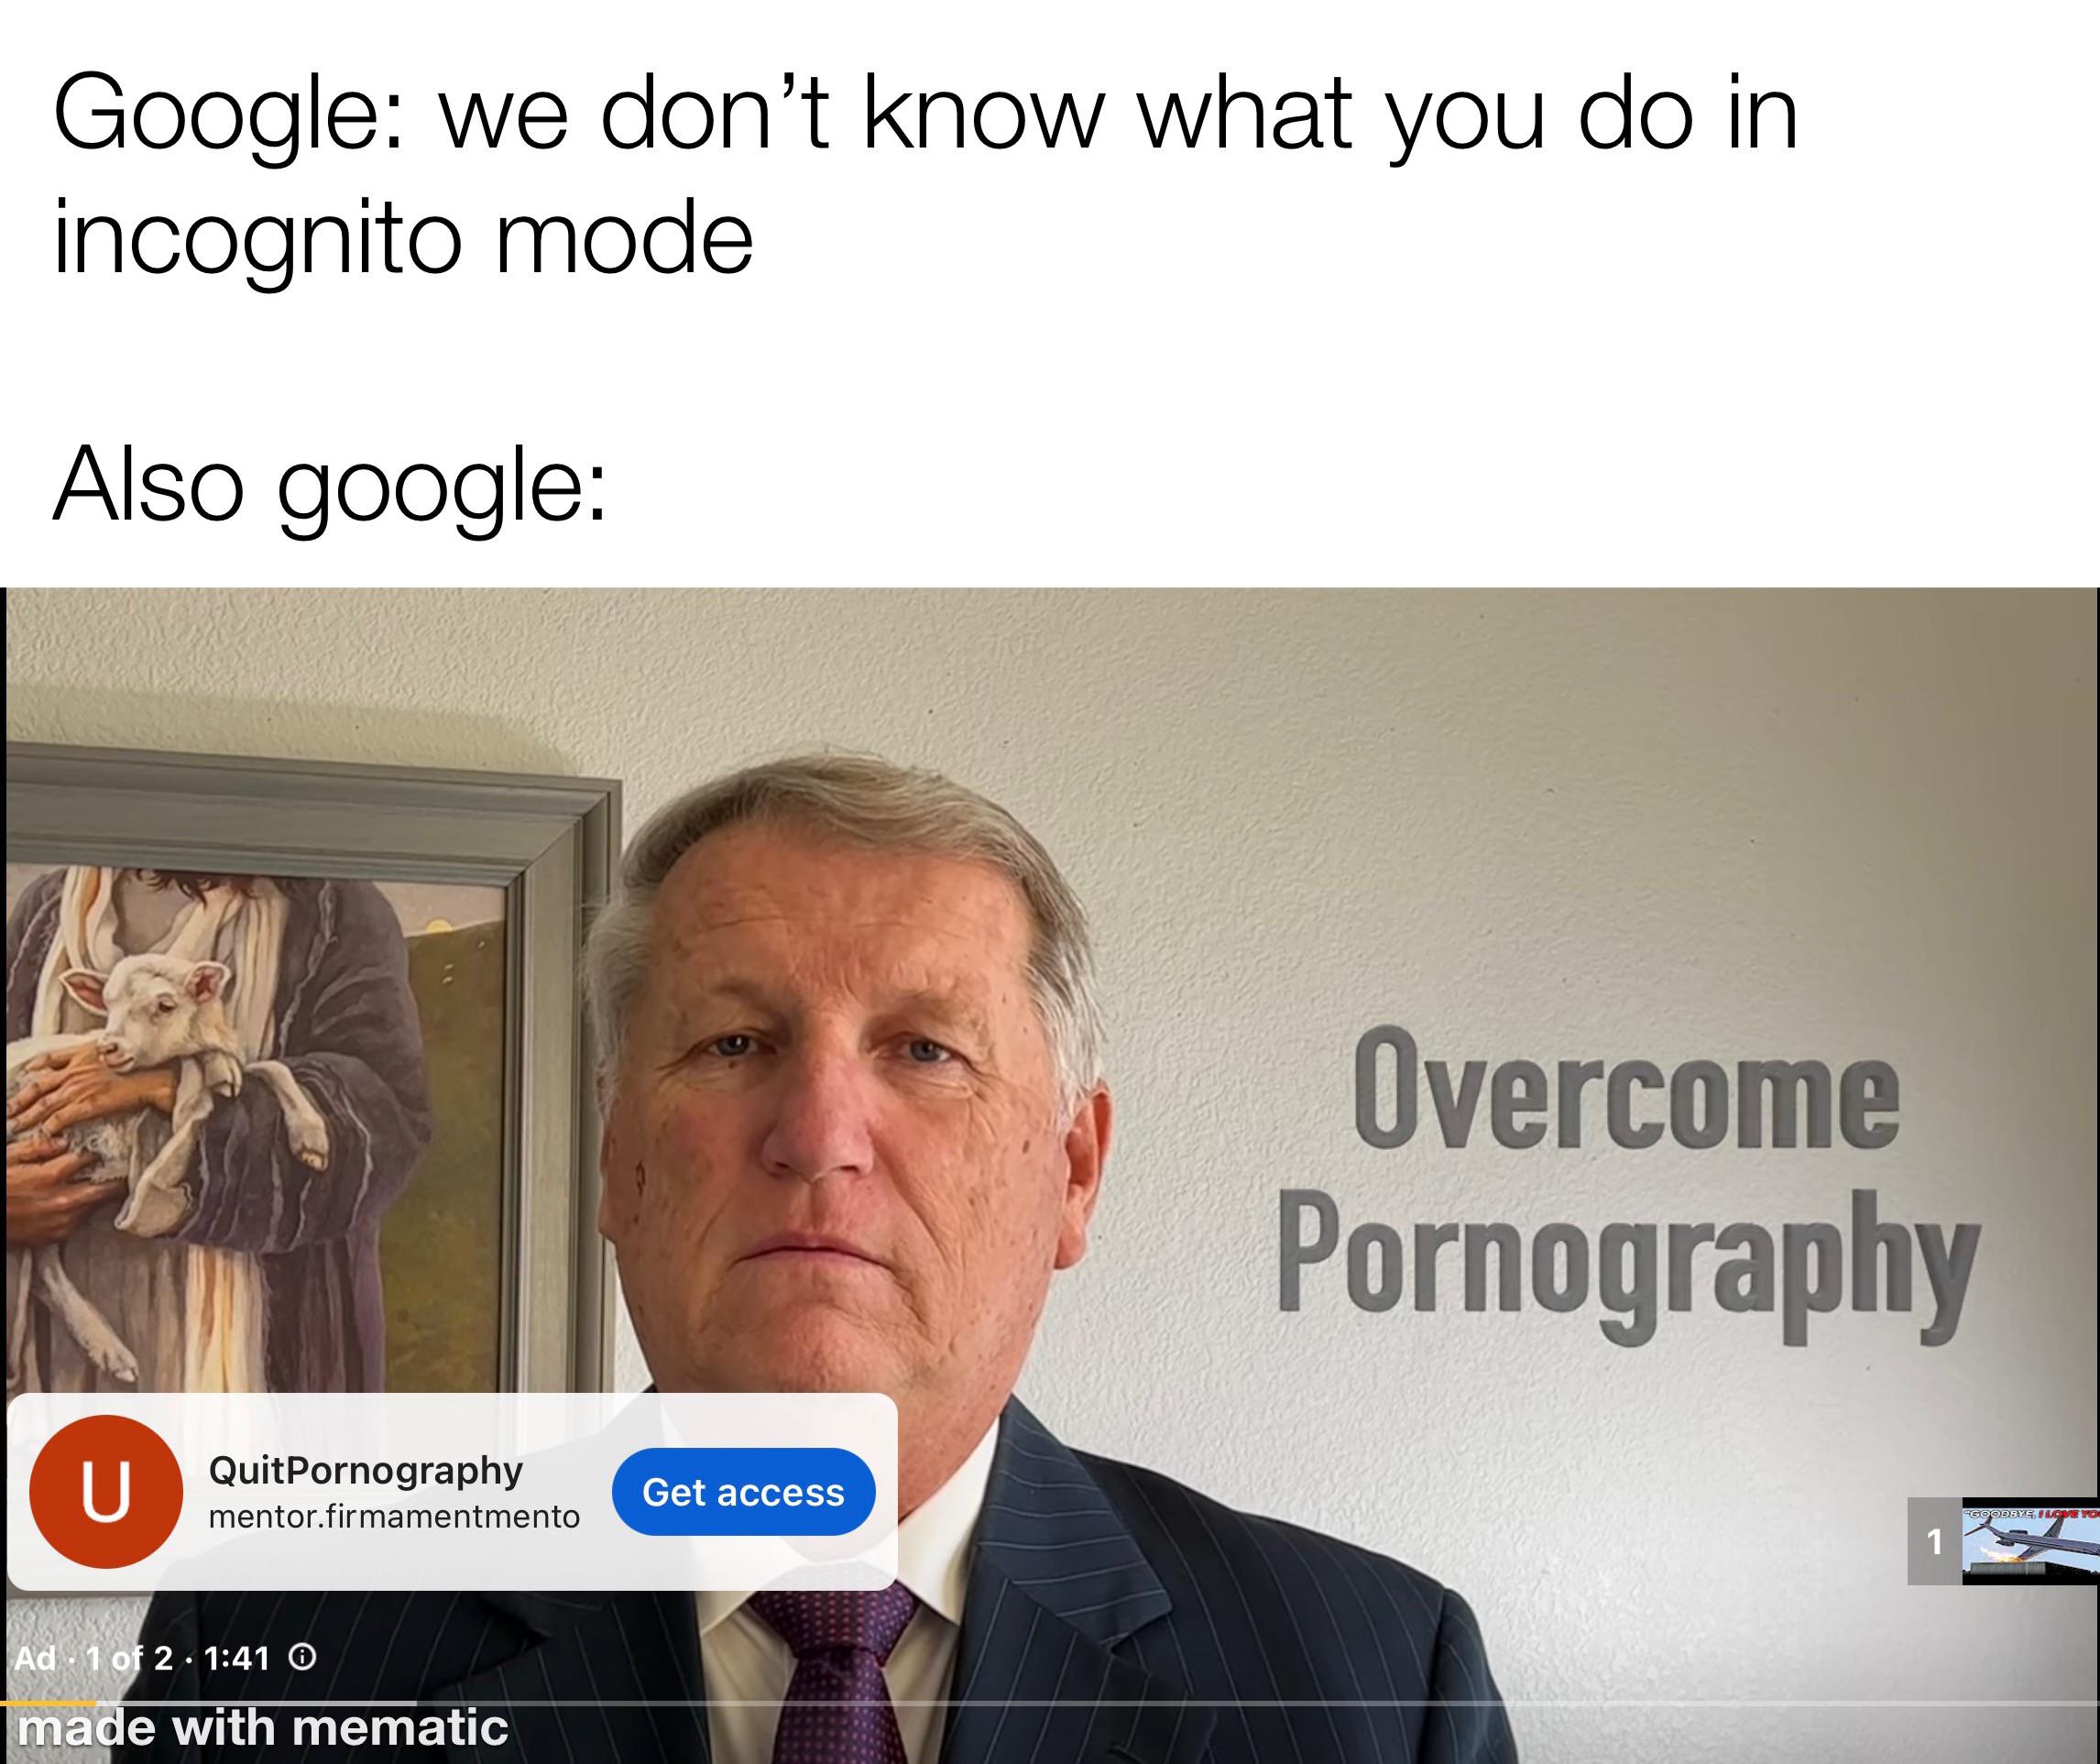 presentation - Google we don't know what you do in incognito mode Also google U QuitPornography mentor.firmamentmento Ad 1 of 2 O made with mematic Get access Overcome Pornography 1 "Goodbye, I Love Yo